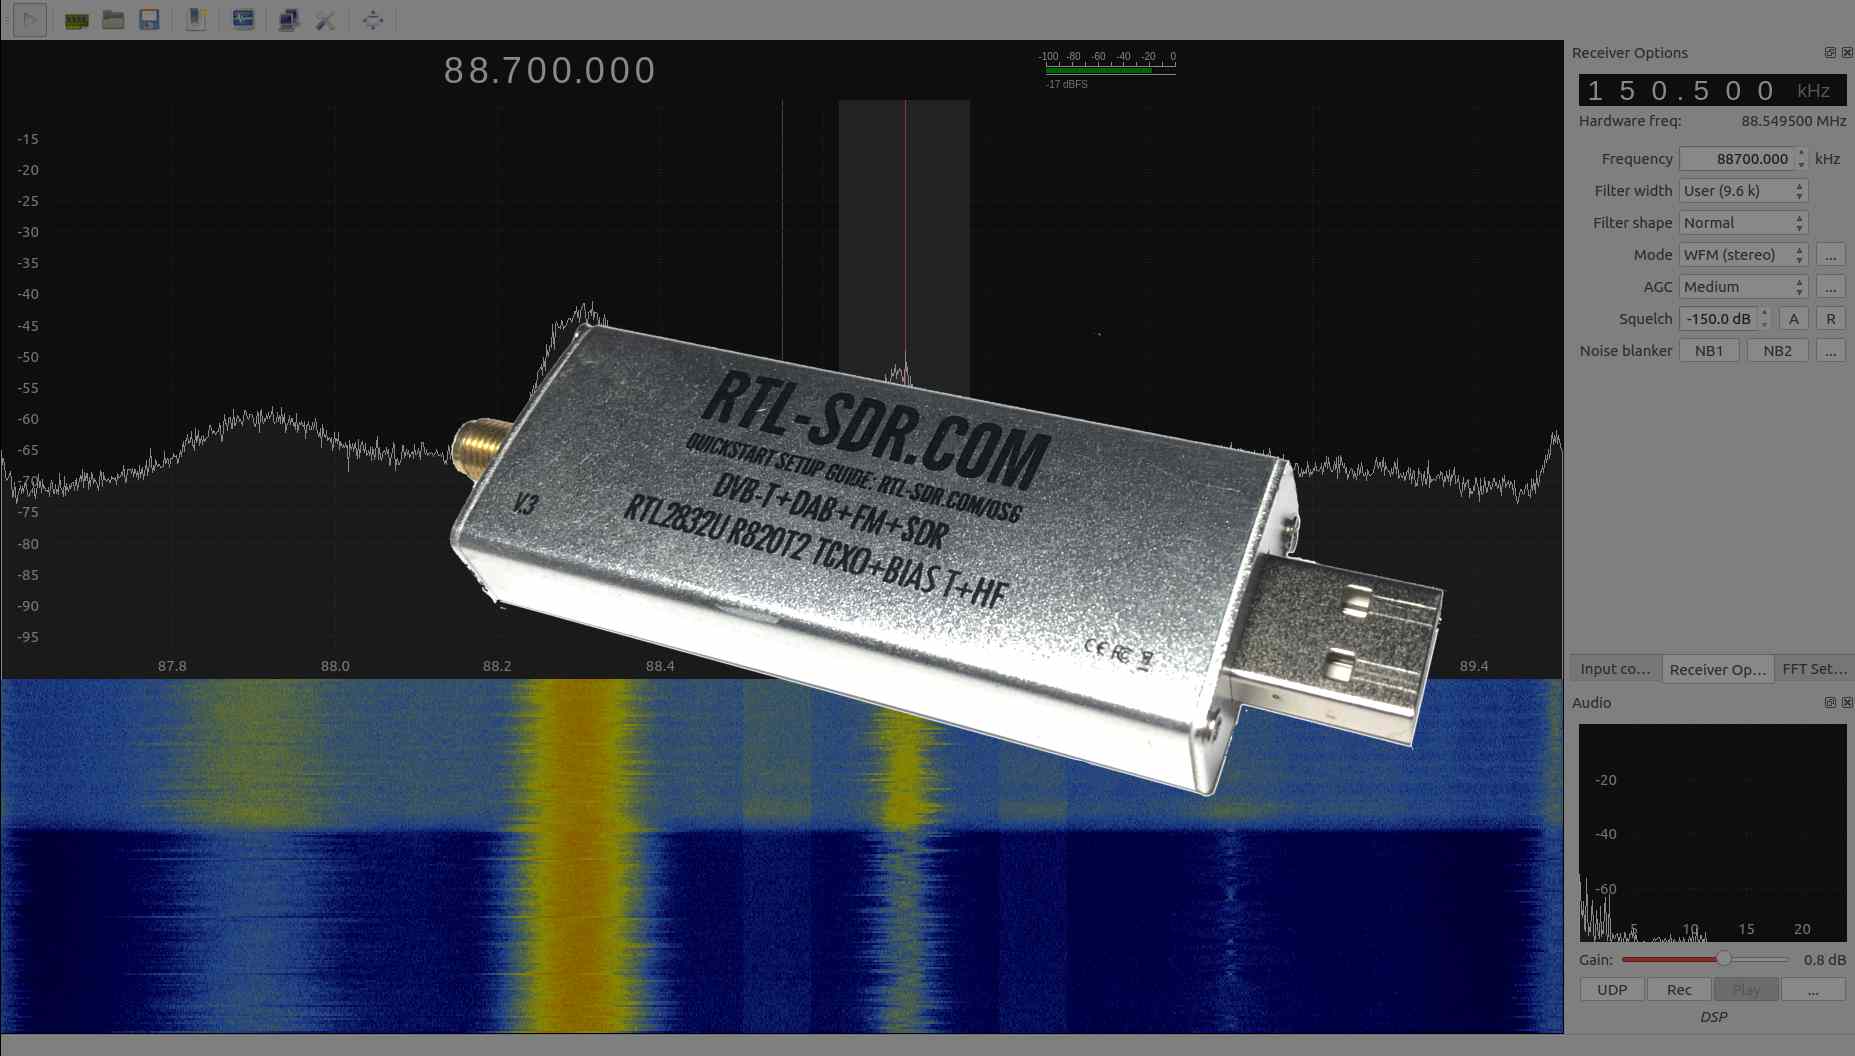 RTL-SDR V3 Review: RF-Vision Superpowers! - OnElectronTech